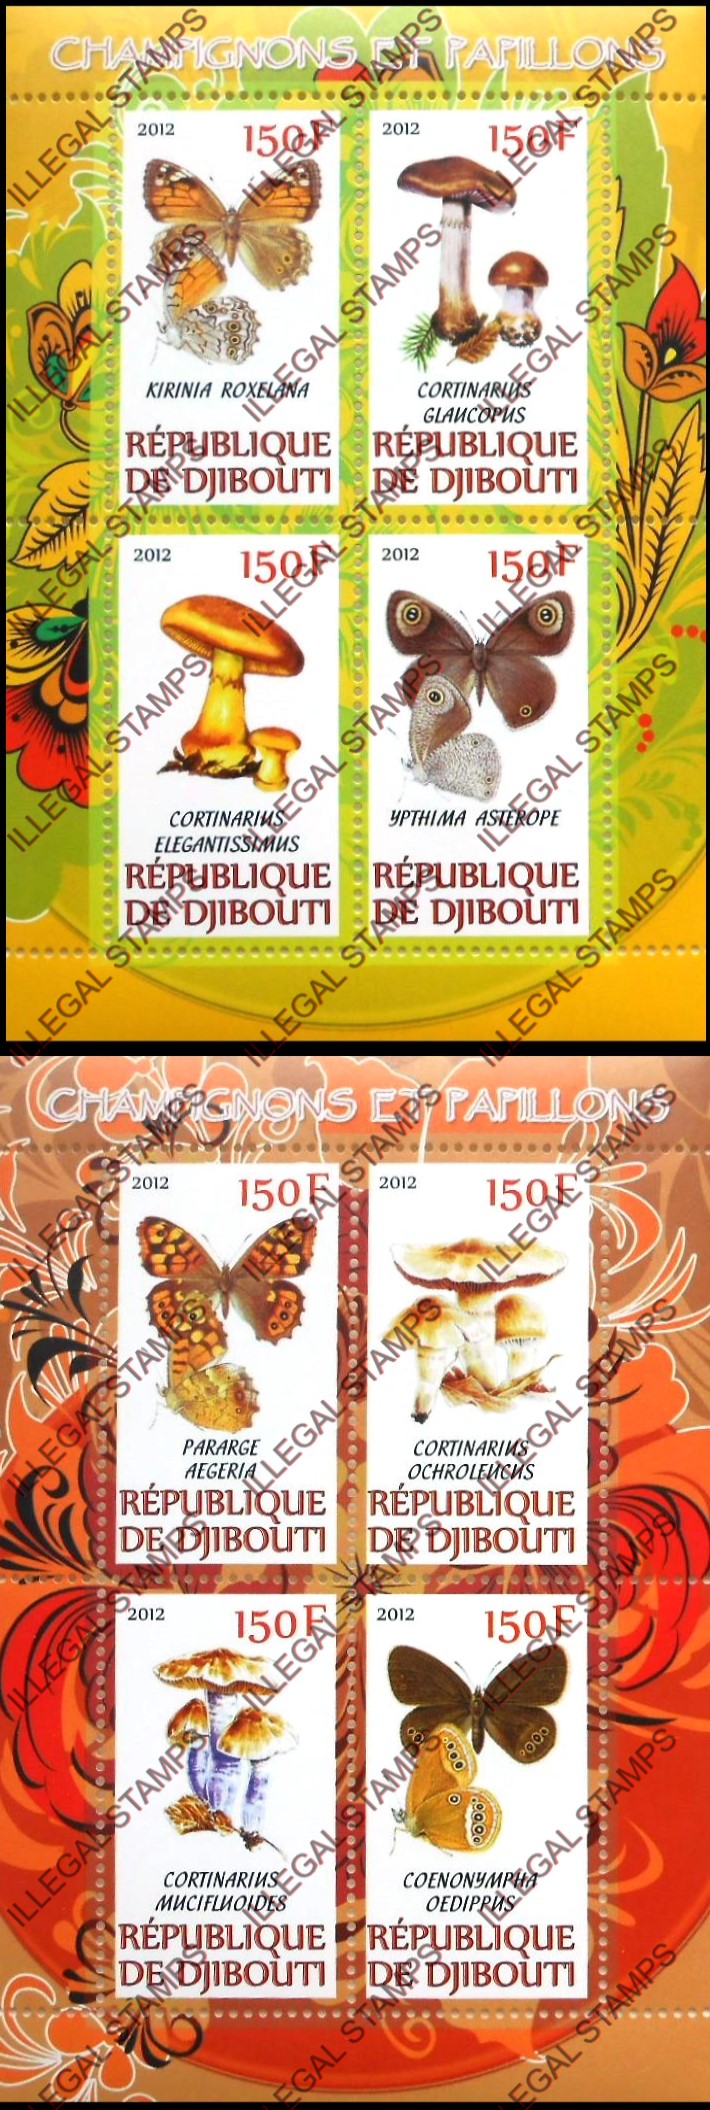 Djibouti 2012 Mushrooms and Butterflies Illegal Stamp Souvenir Sheets of 4